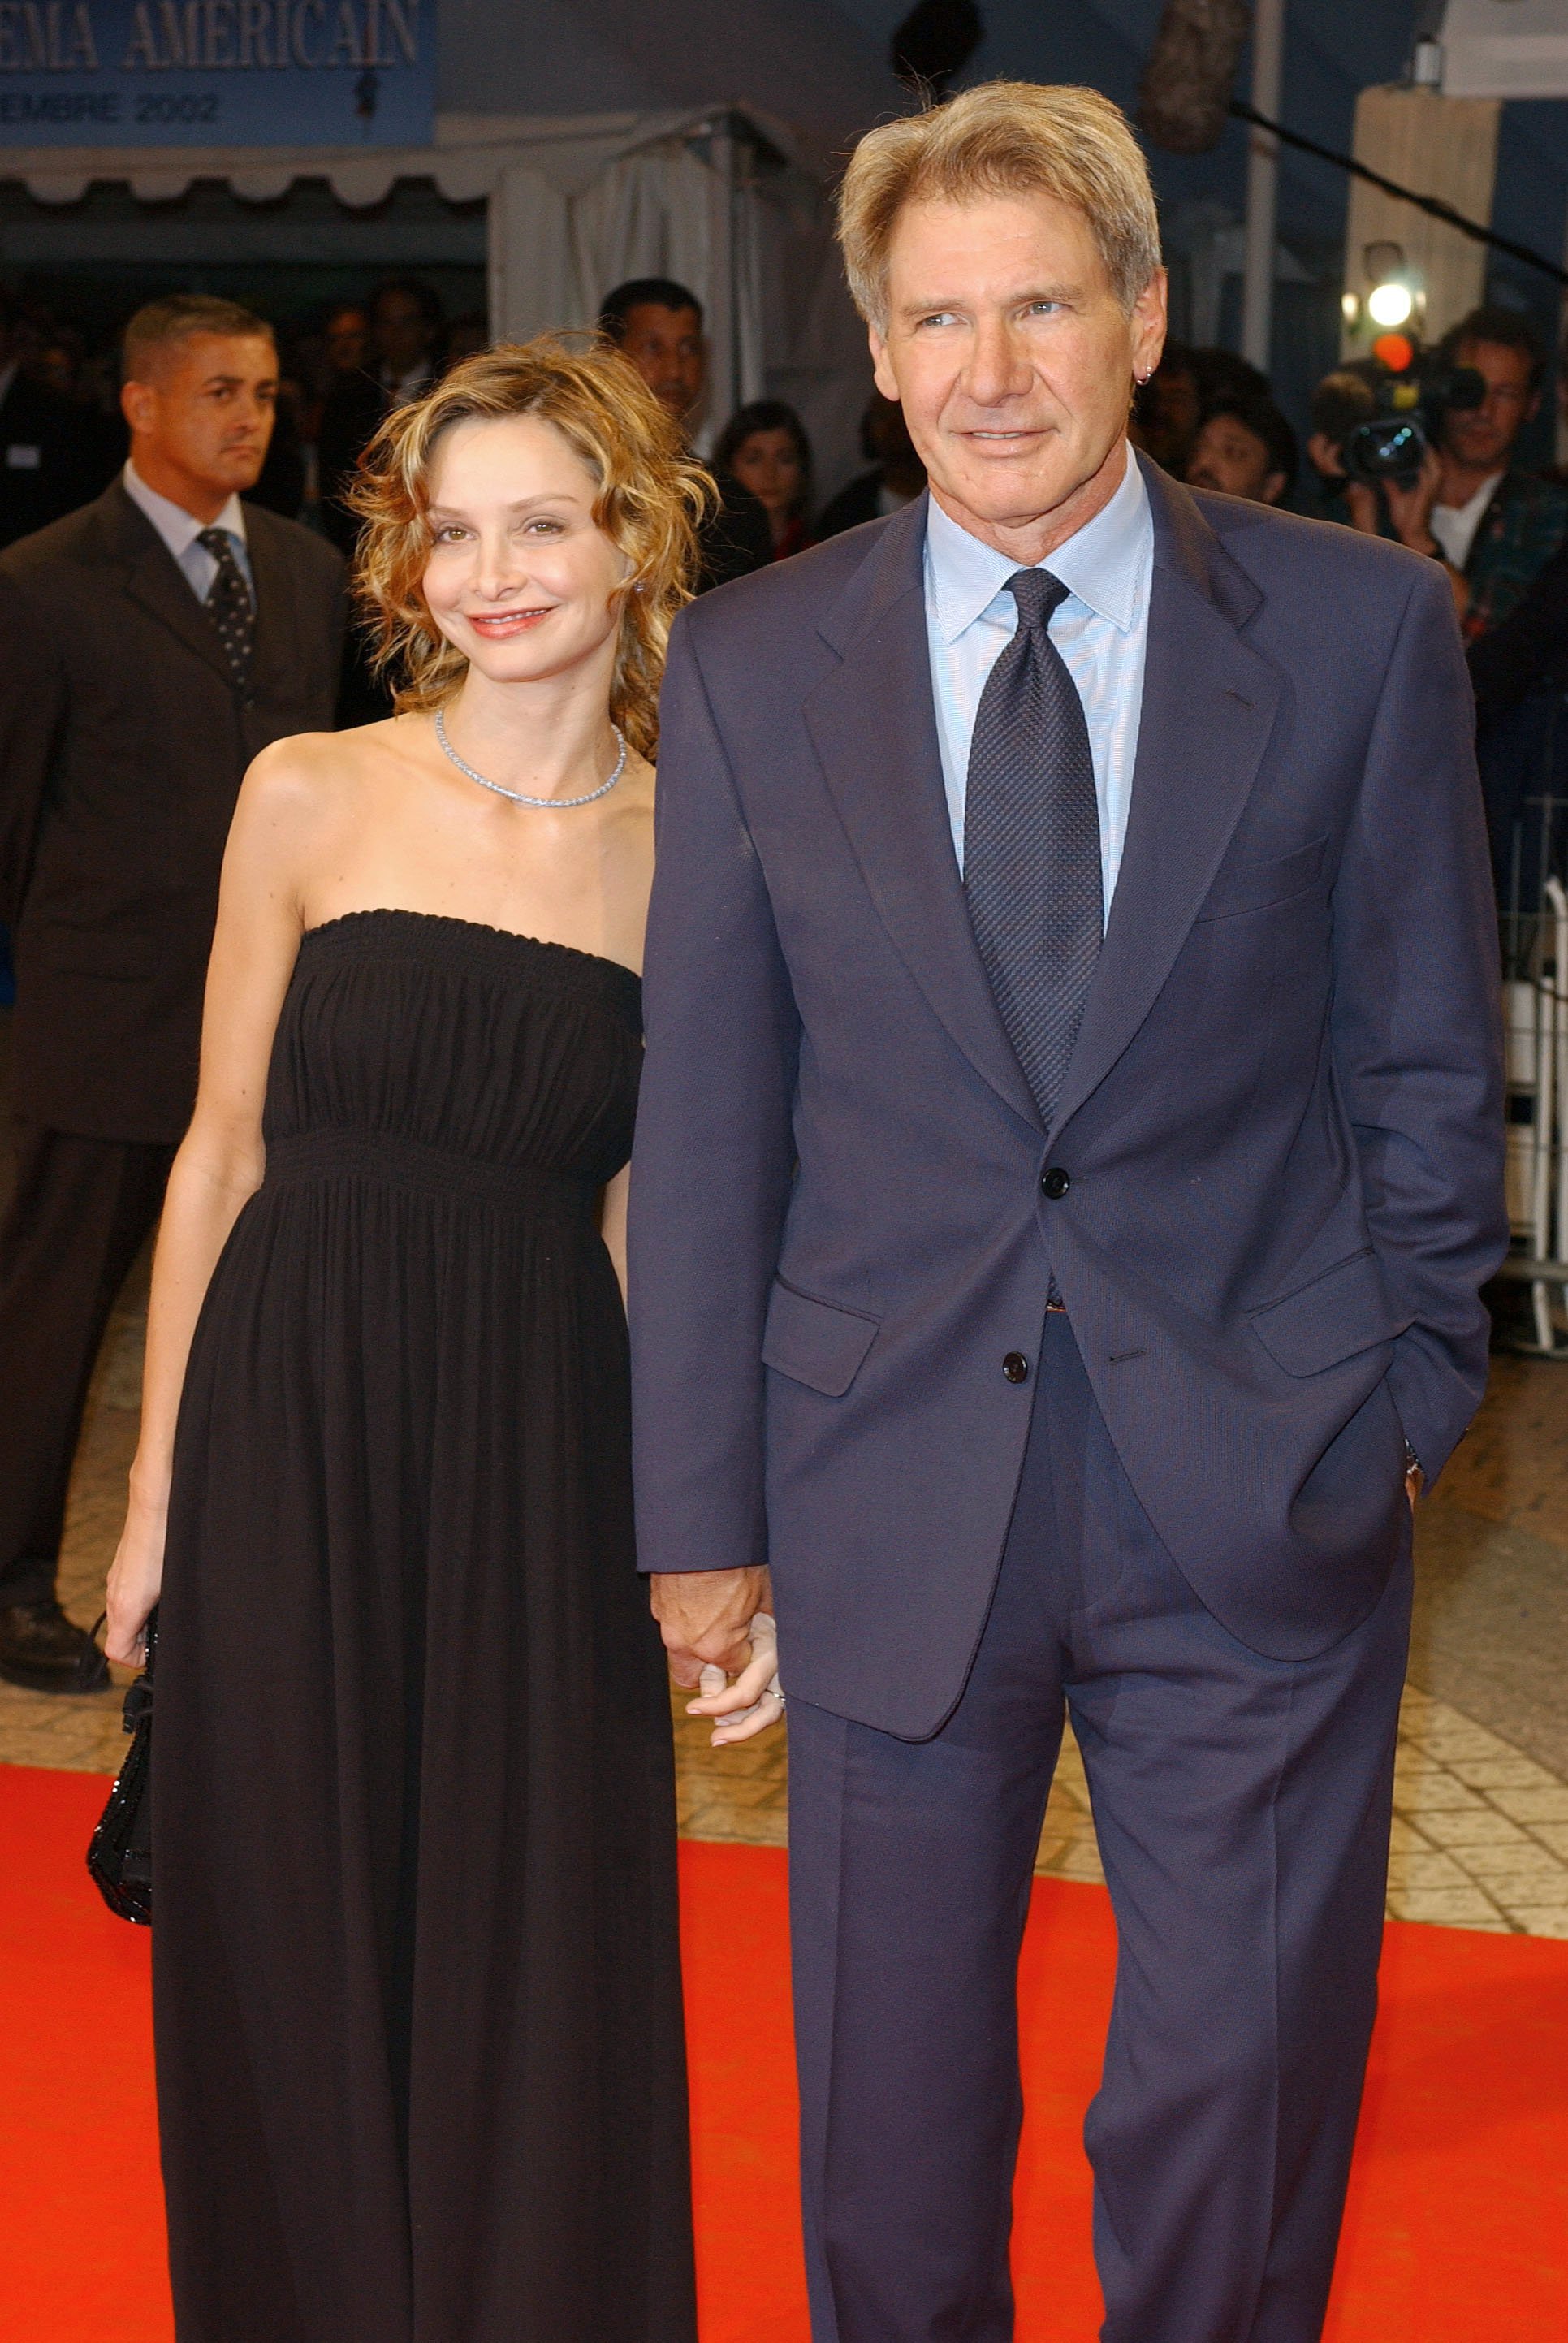 Calista Flockhart and Harrison Ford at the "K-19: The Widow Maker" premiere at the Deauville Festival of American Cinema on September 3, 2002. | Source: Getty Images